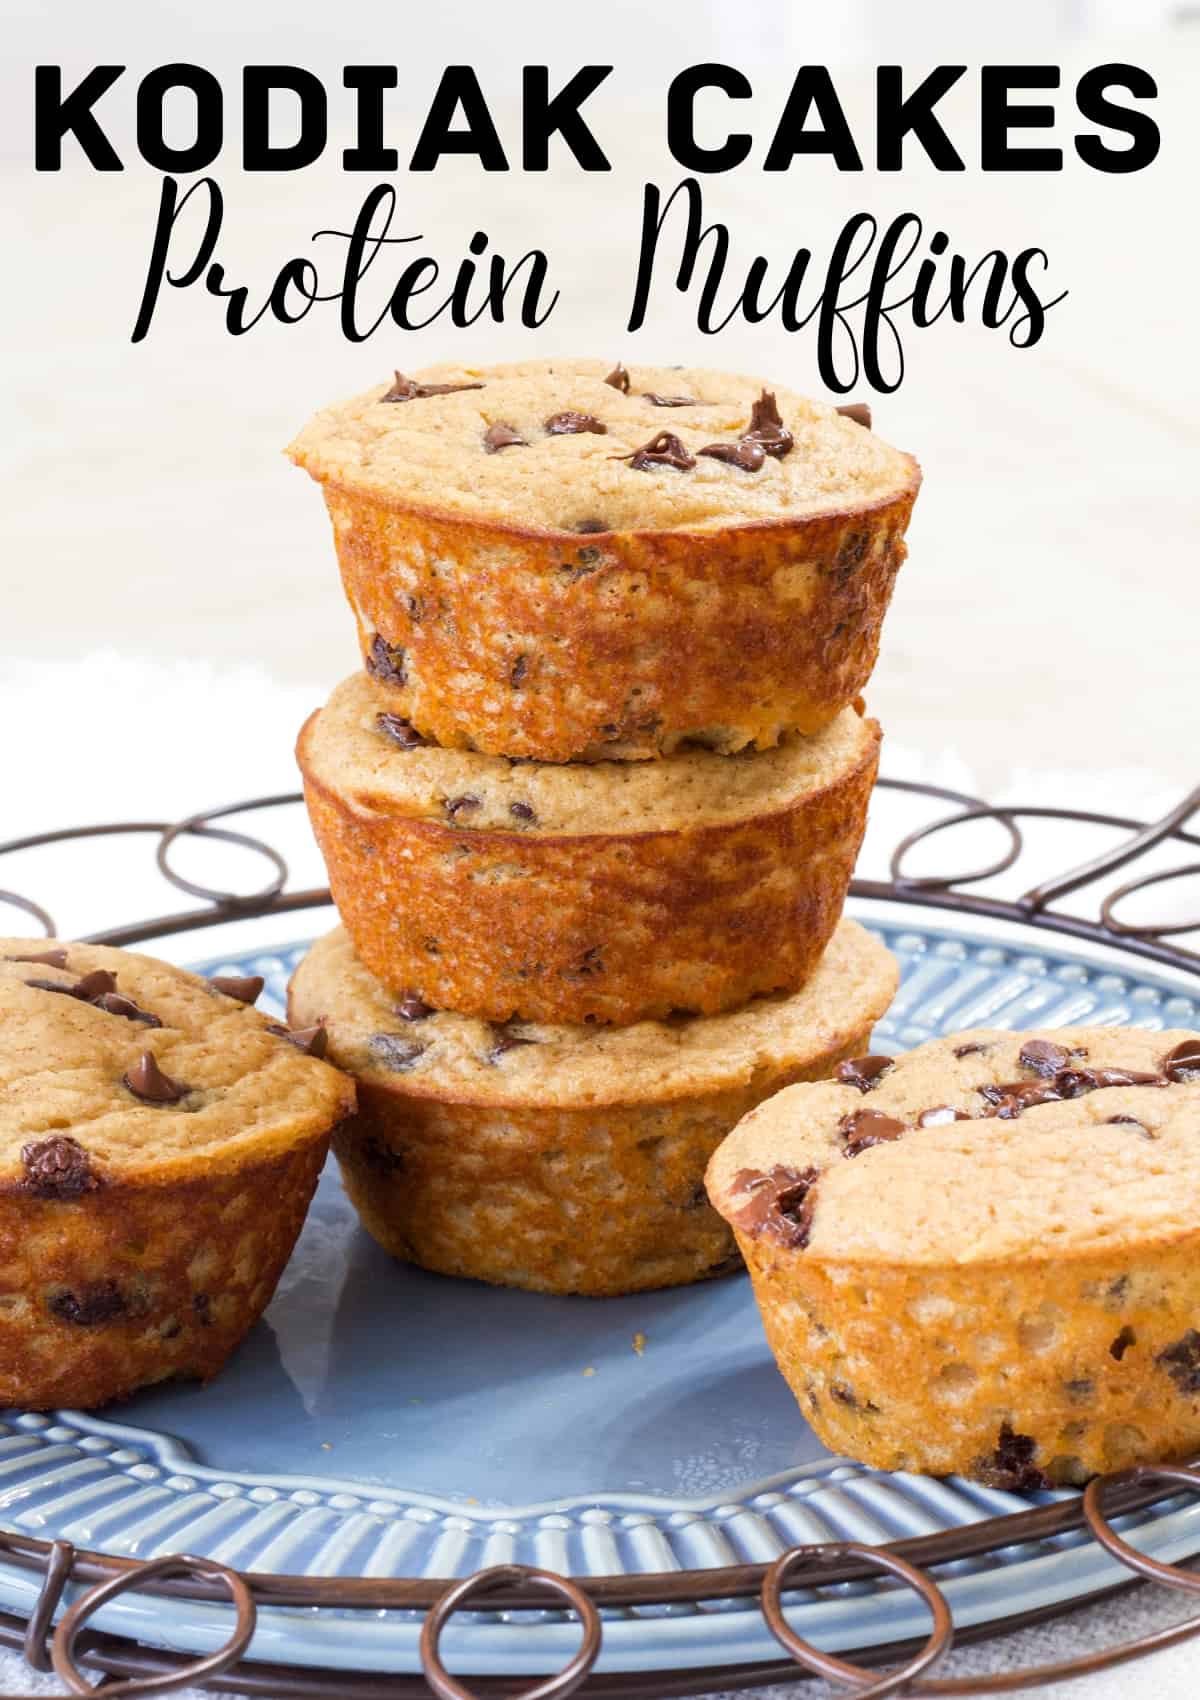 Kodiak Cakes Muffin recipe (without banana) are a great grab and go breakfast or snack that are high in protein. No protein powder required! via @mindyscookingobsession